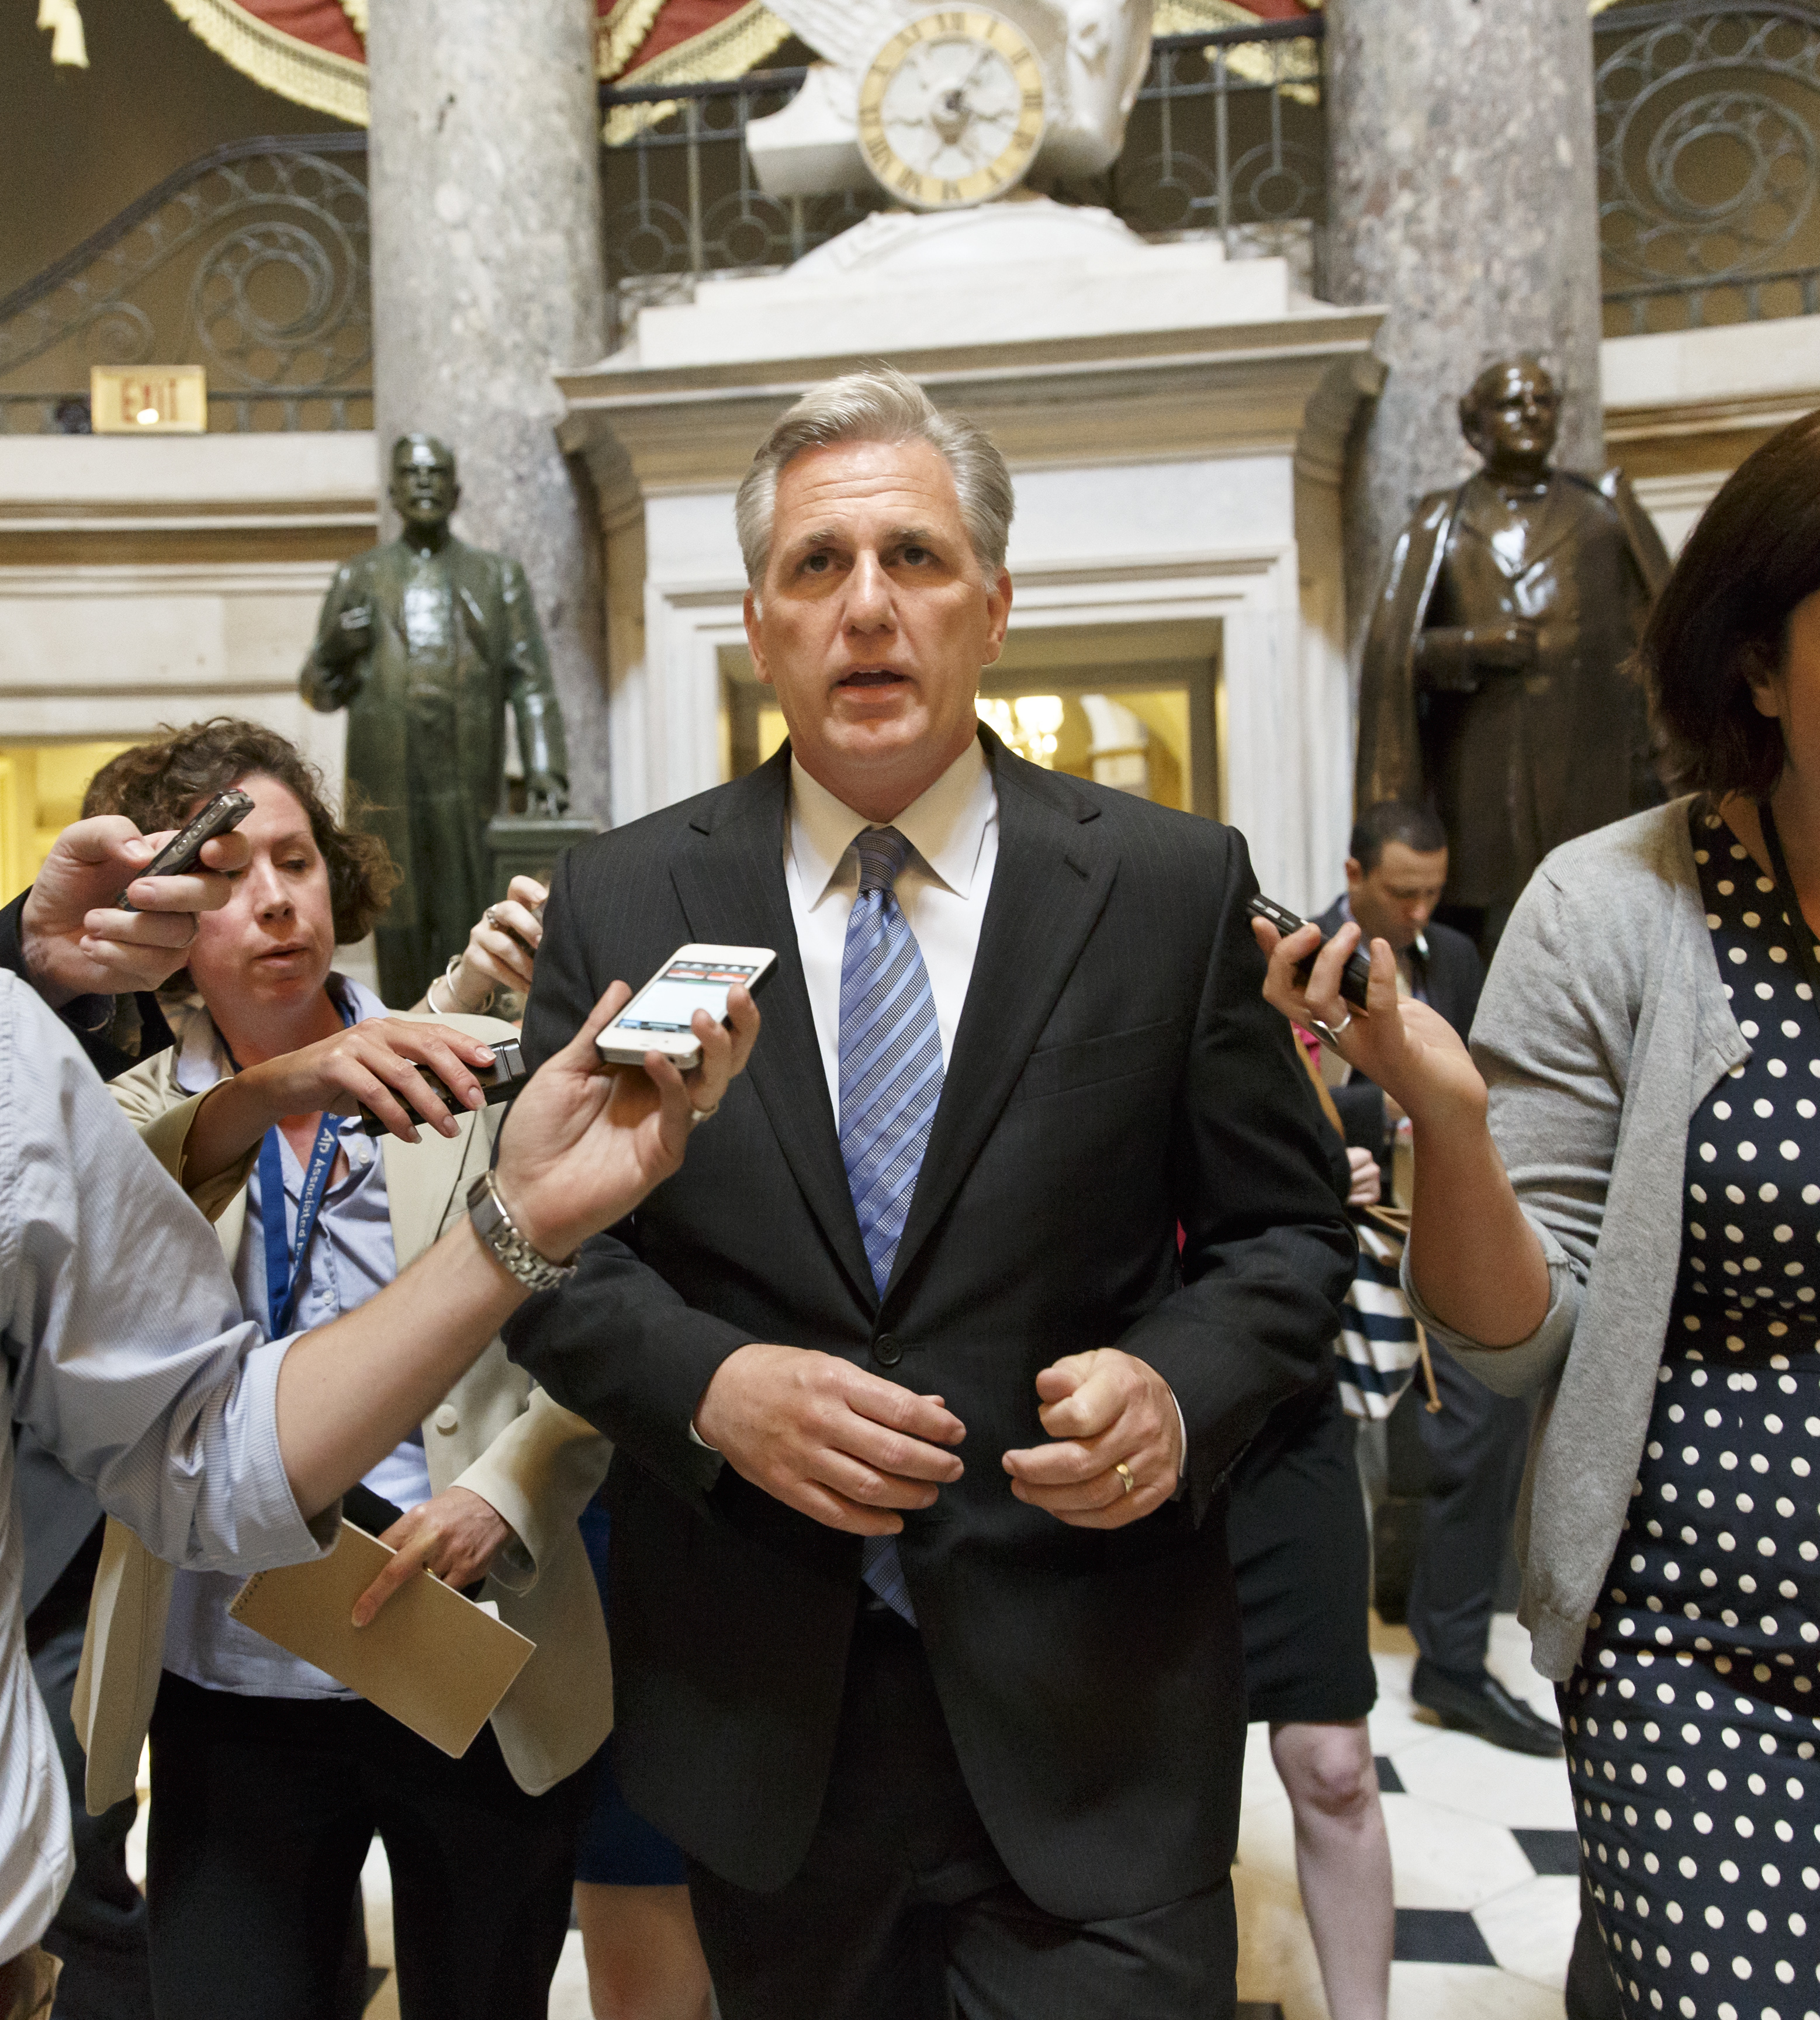 House Majority Whip Kevin McCarthy, R-Calif., leaves House Speaker John Boehner's office on the day after House Majority Leader Eric Cantor, R-Va., was defeated in the Virginia primary at the hands of a tea party challenger, at the Capitol in Washington, Wednesday, June 11, 2014. (J. Scott Applewhite—AP)